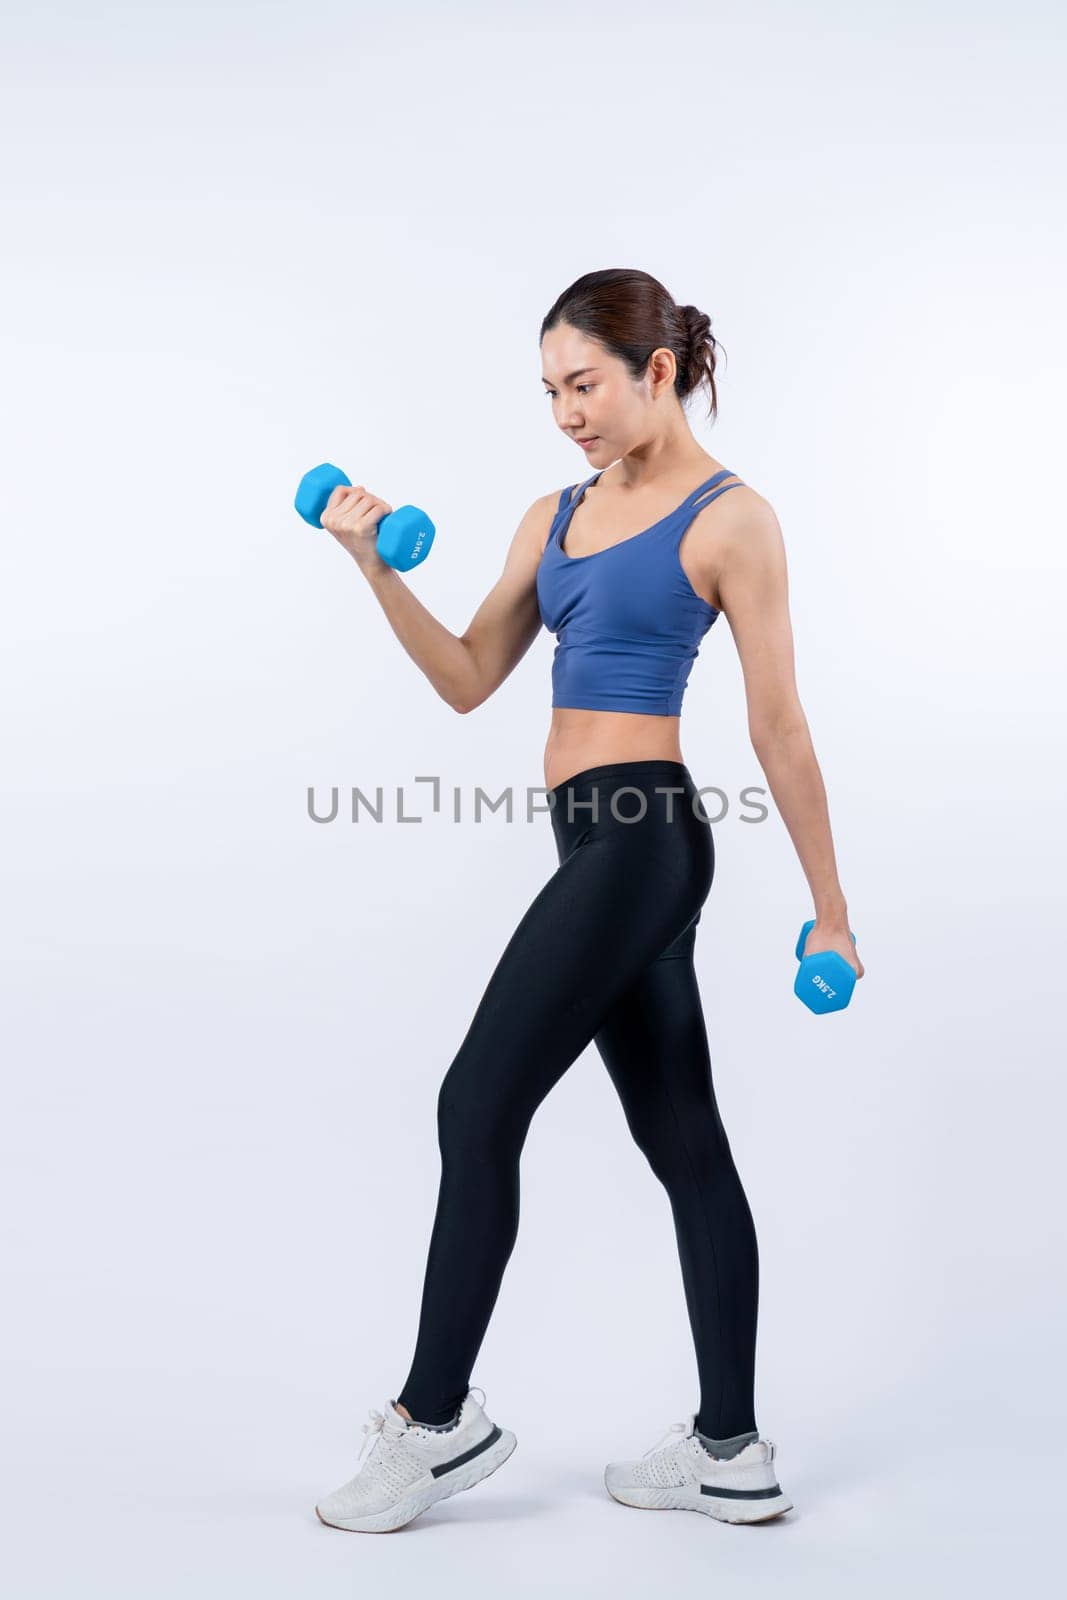 Vigorous energetic woman doing yoga with dumbbell weight exercise. by biancoblue